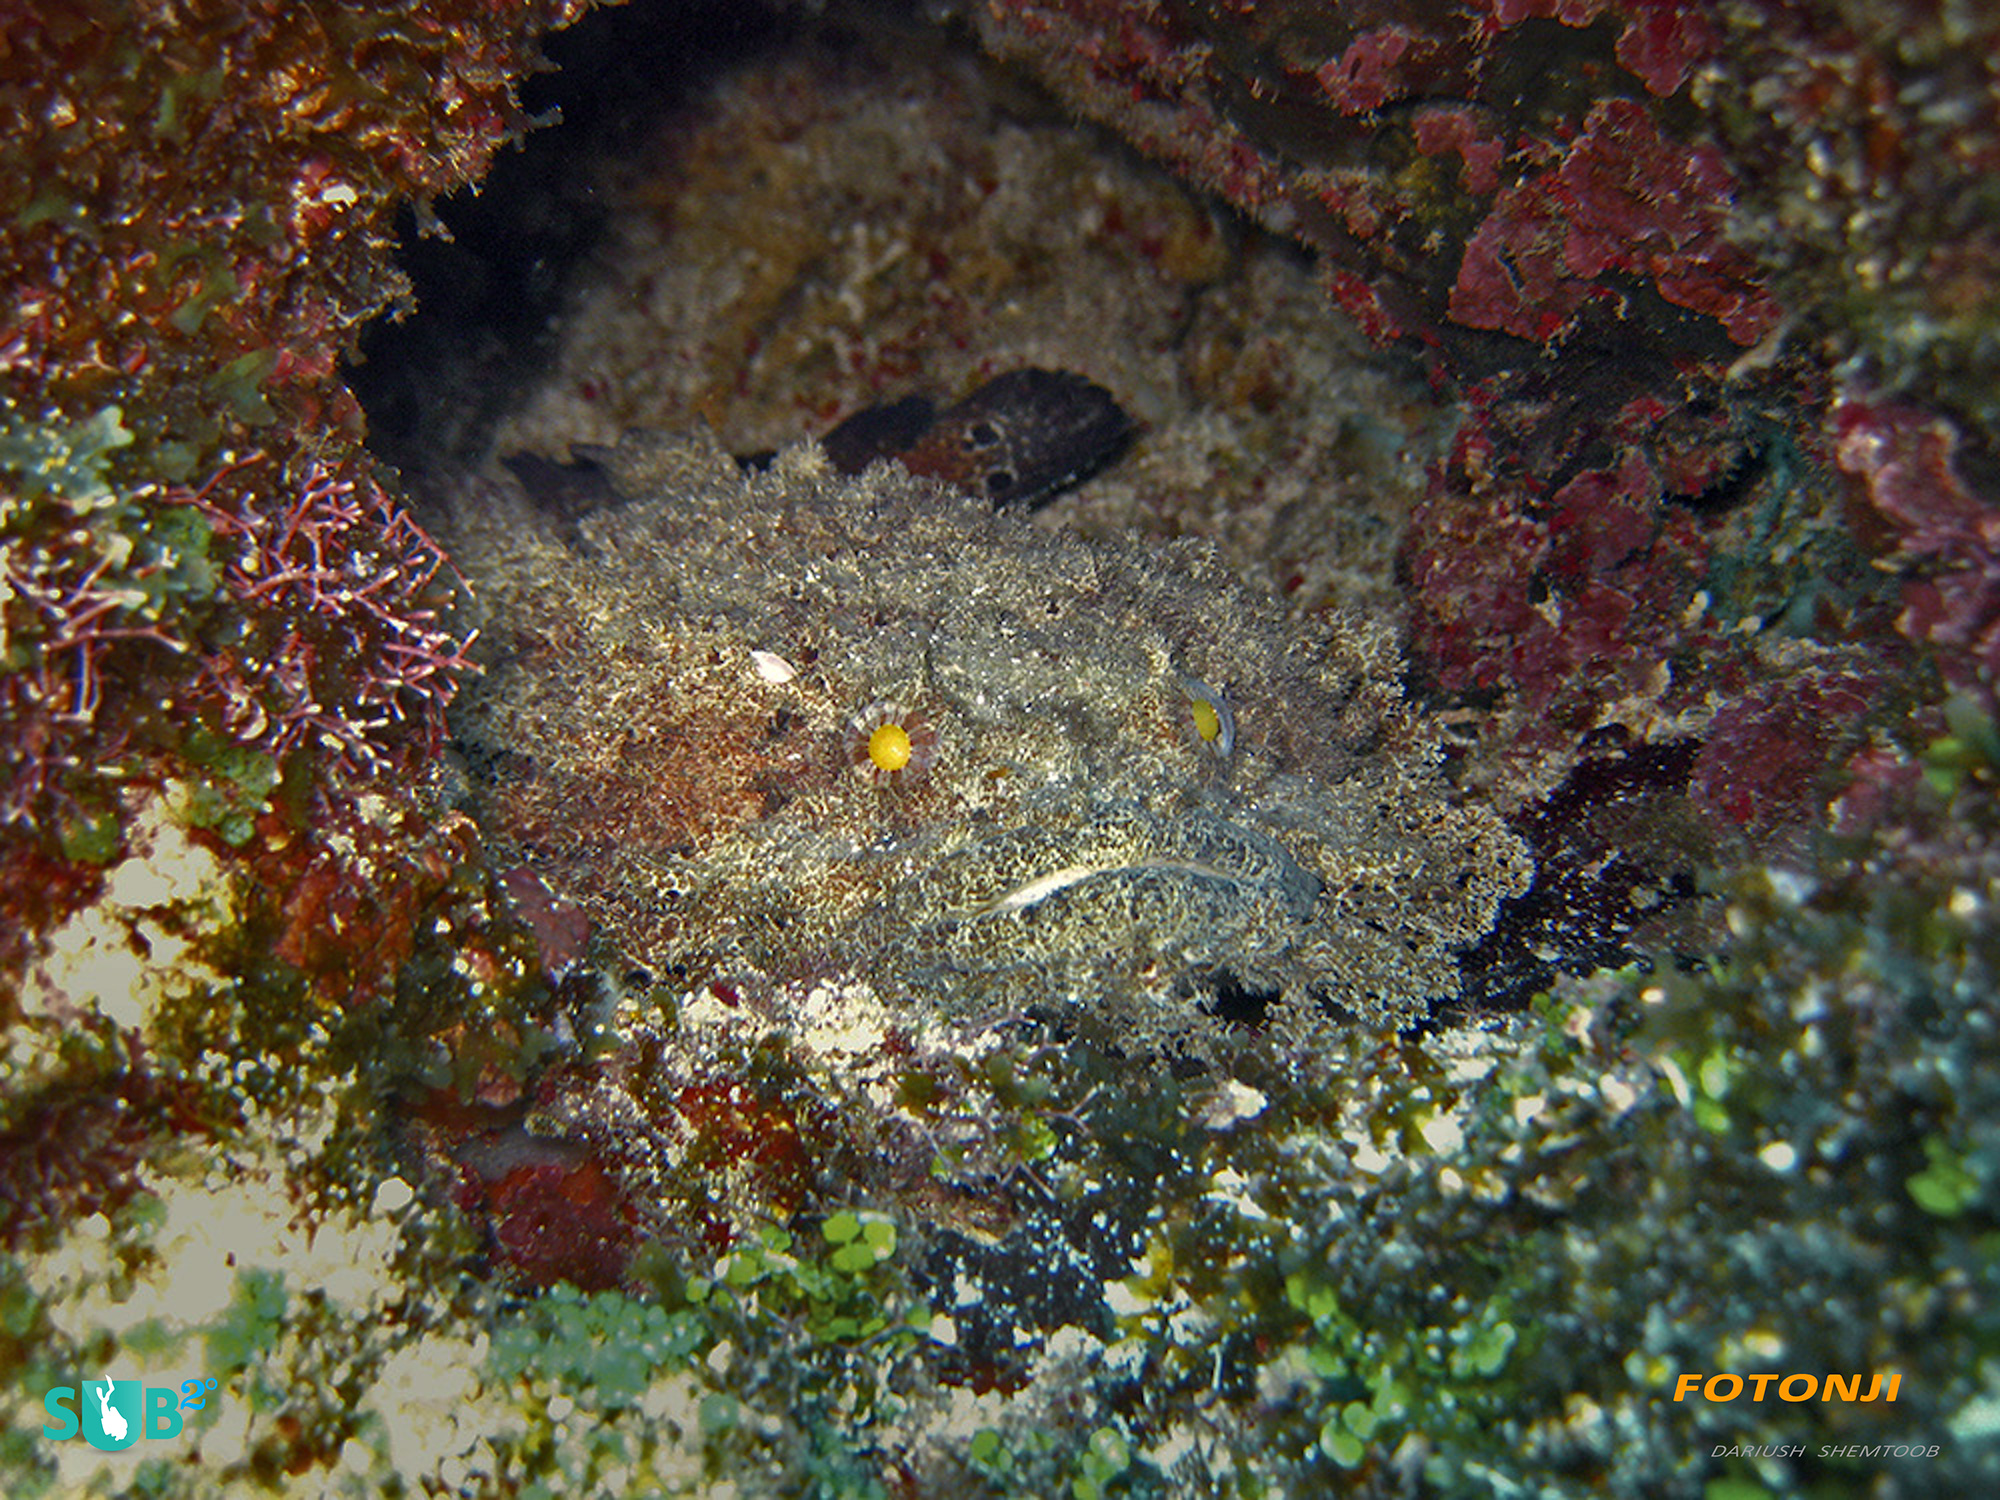 The Devil Fish is one of the more unique finds in the Corn Islands